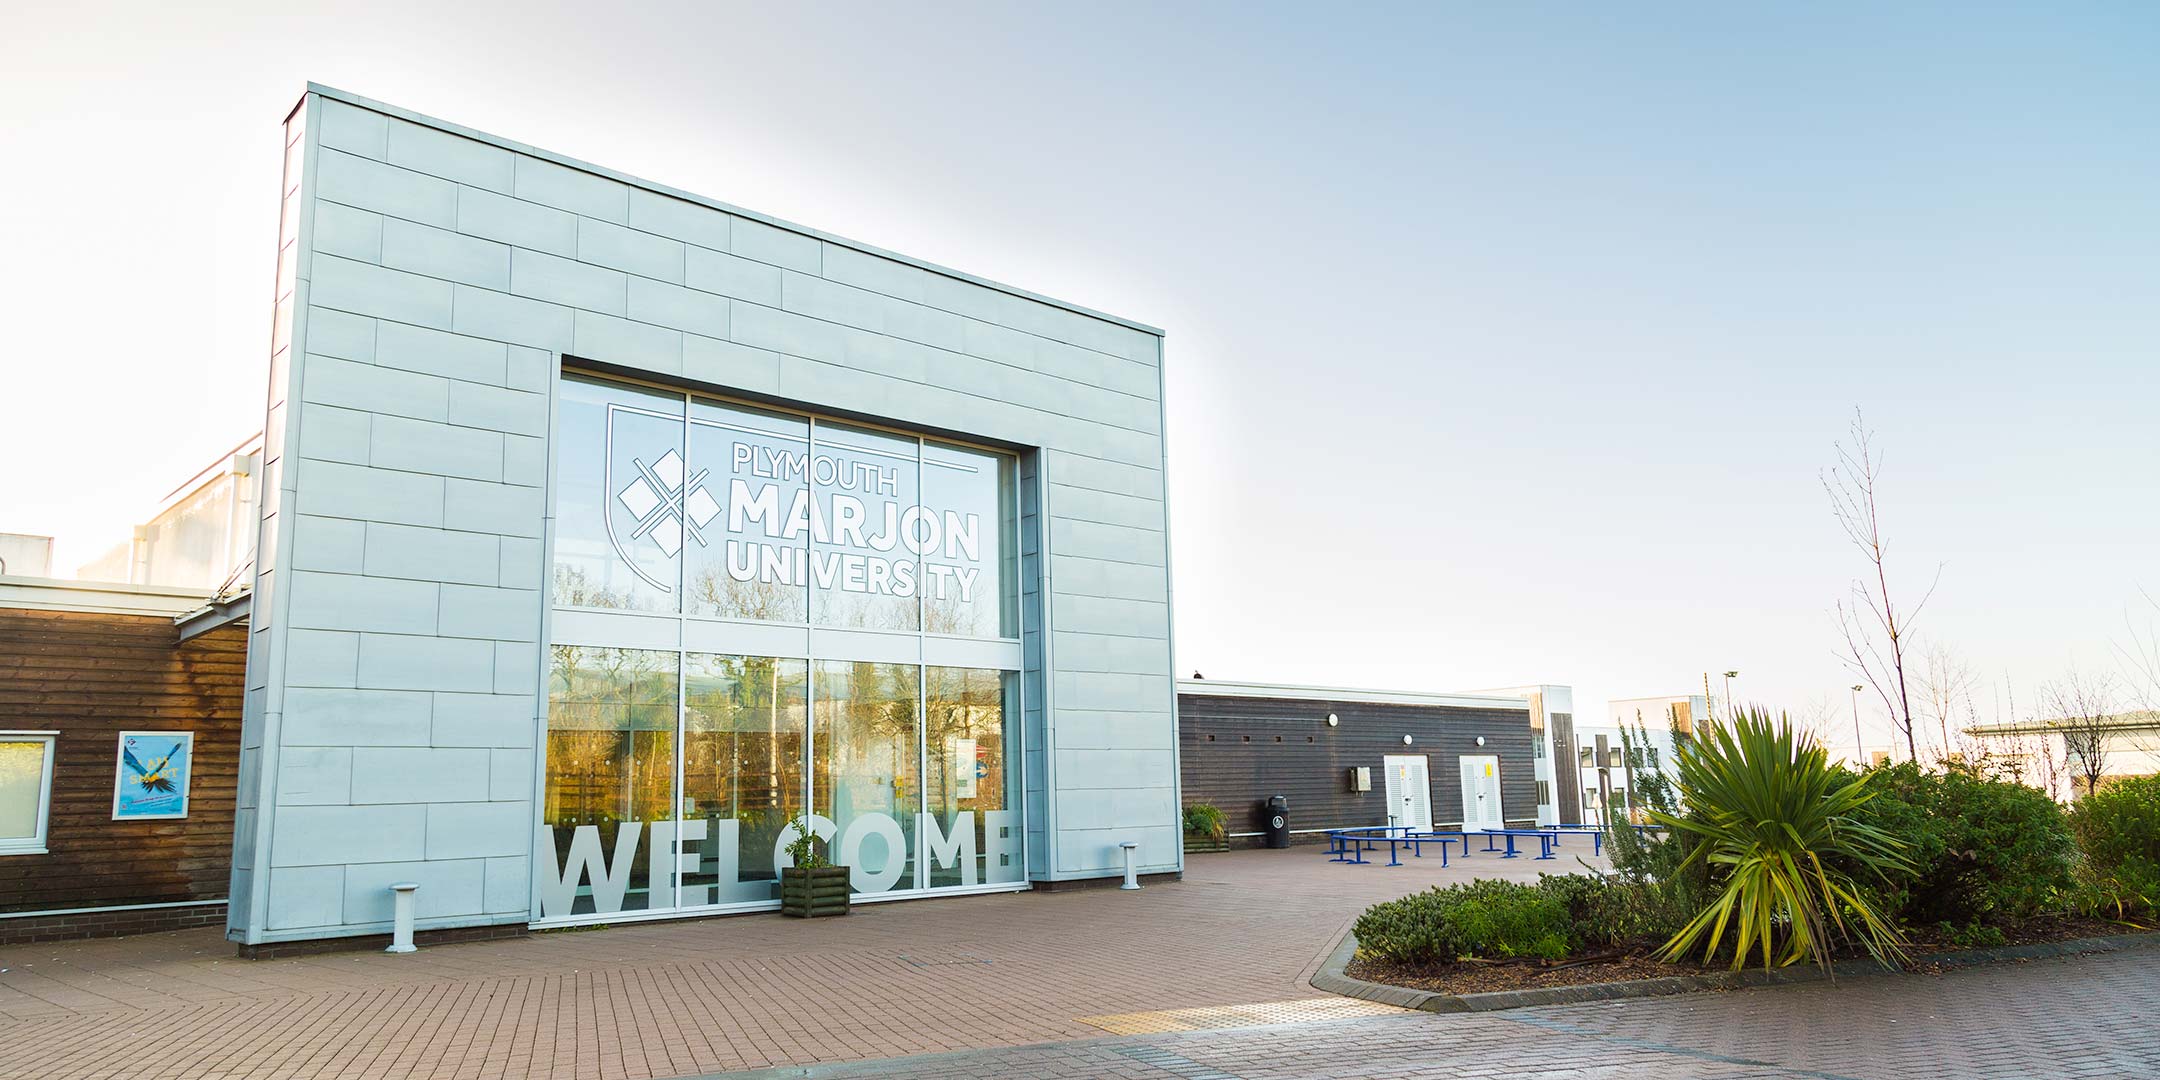 Thumbnail for https://www.marjon.ac.uk/about-marjon/news-and-events/university-events/calendar/events/marjon-business-school-launch.php